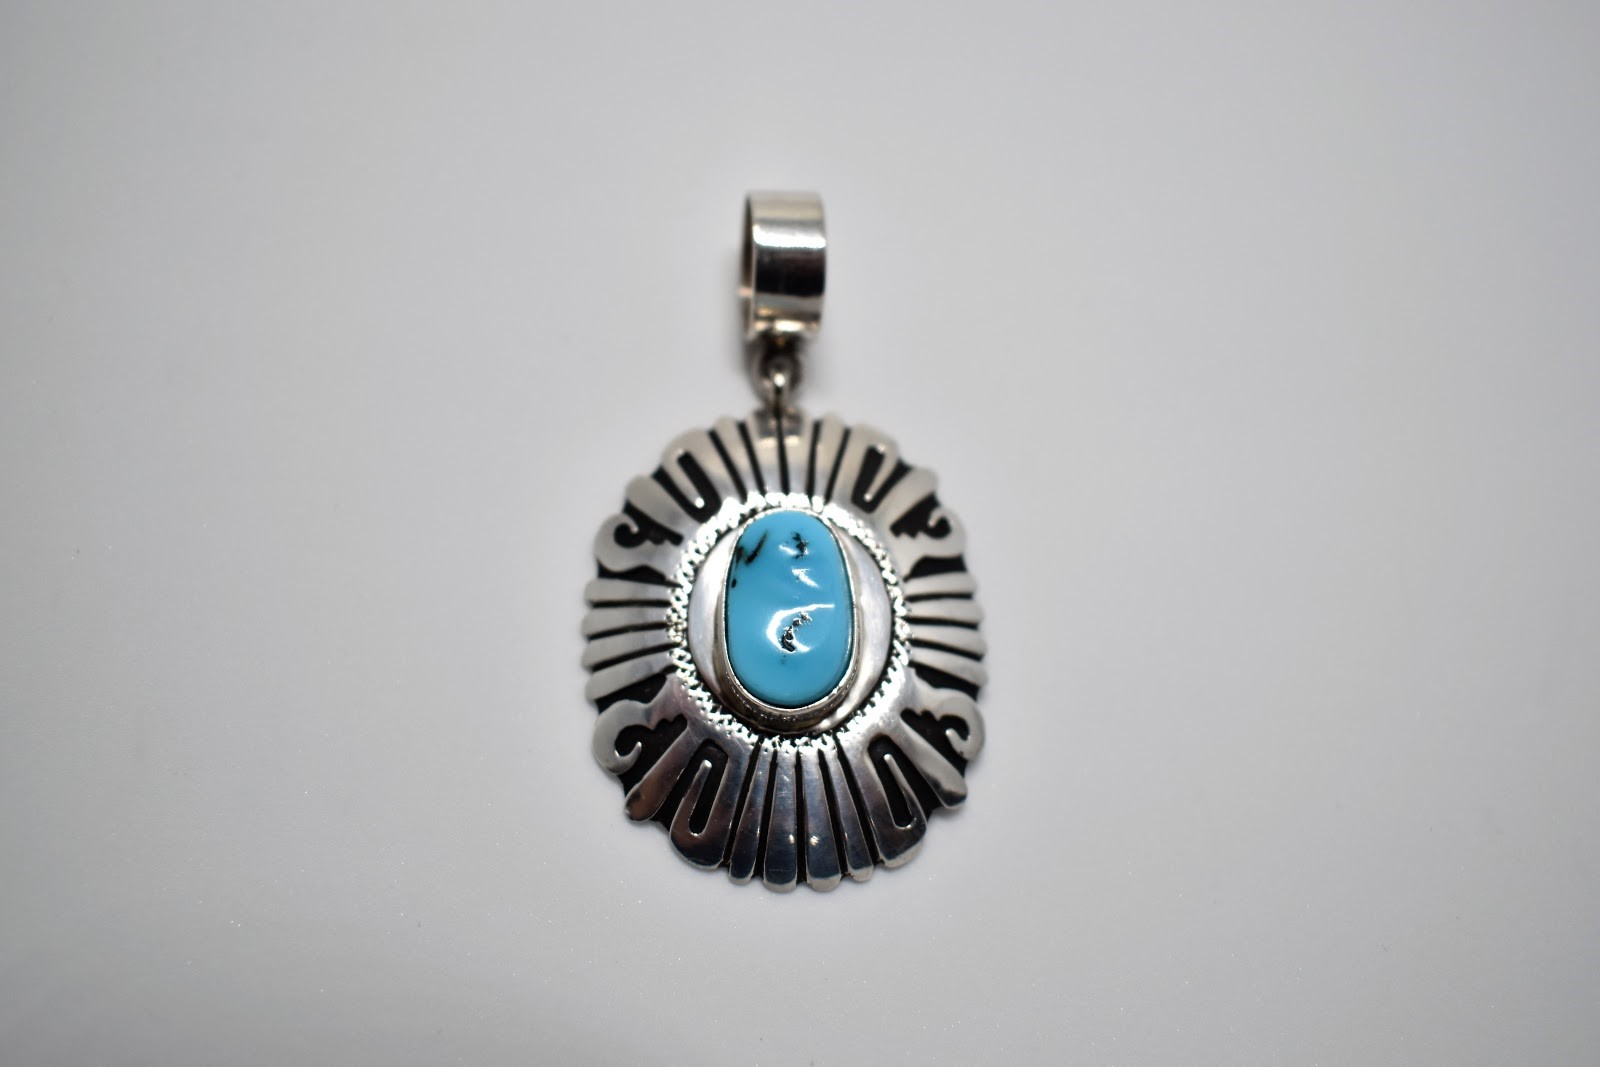 Details about   SMALL STERLING SILVER & TURQUOISE PENDANT/CHARM  J-607 